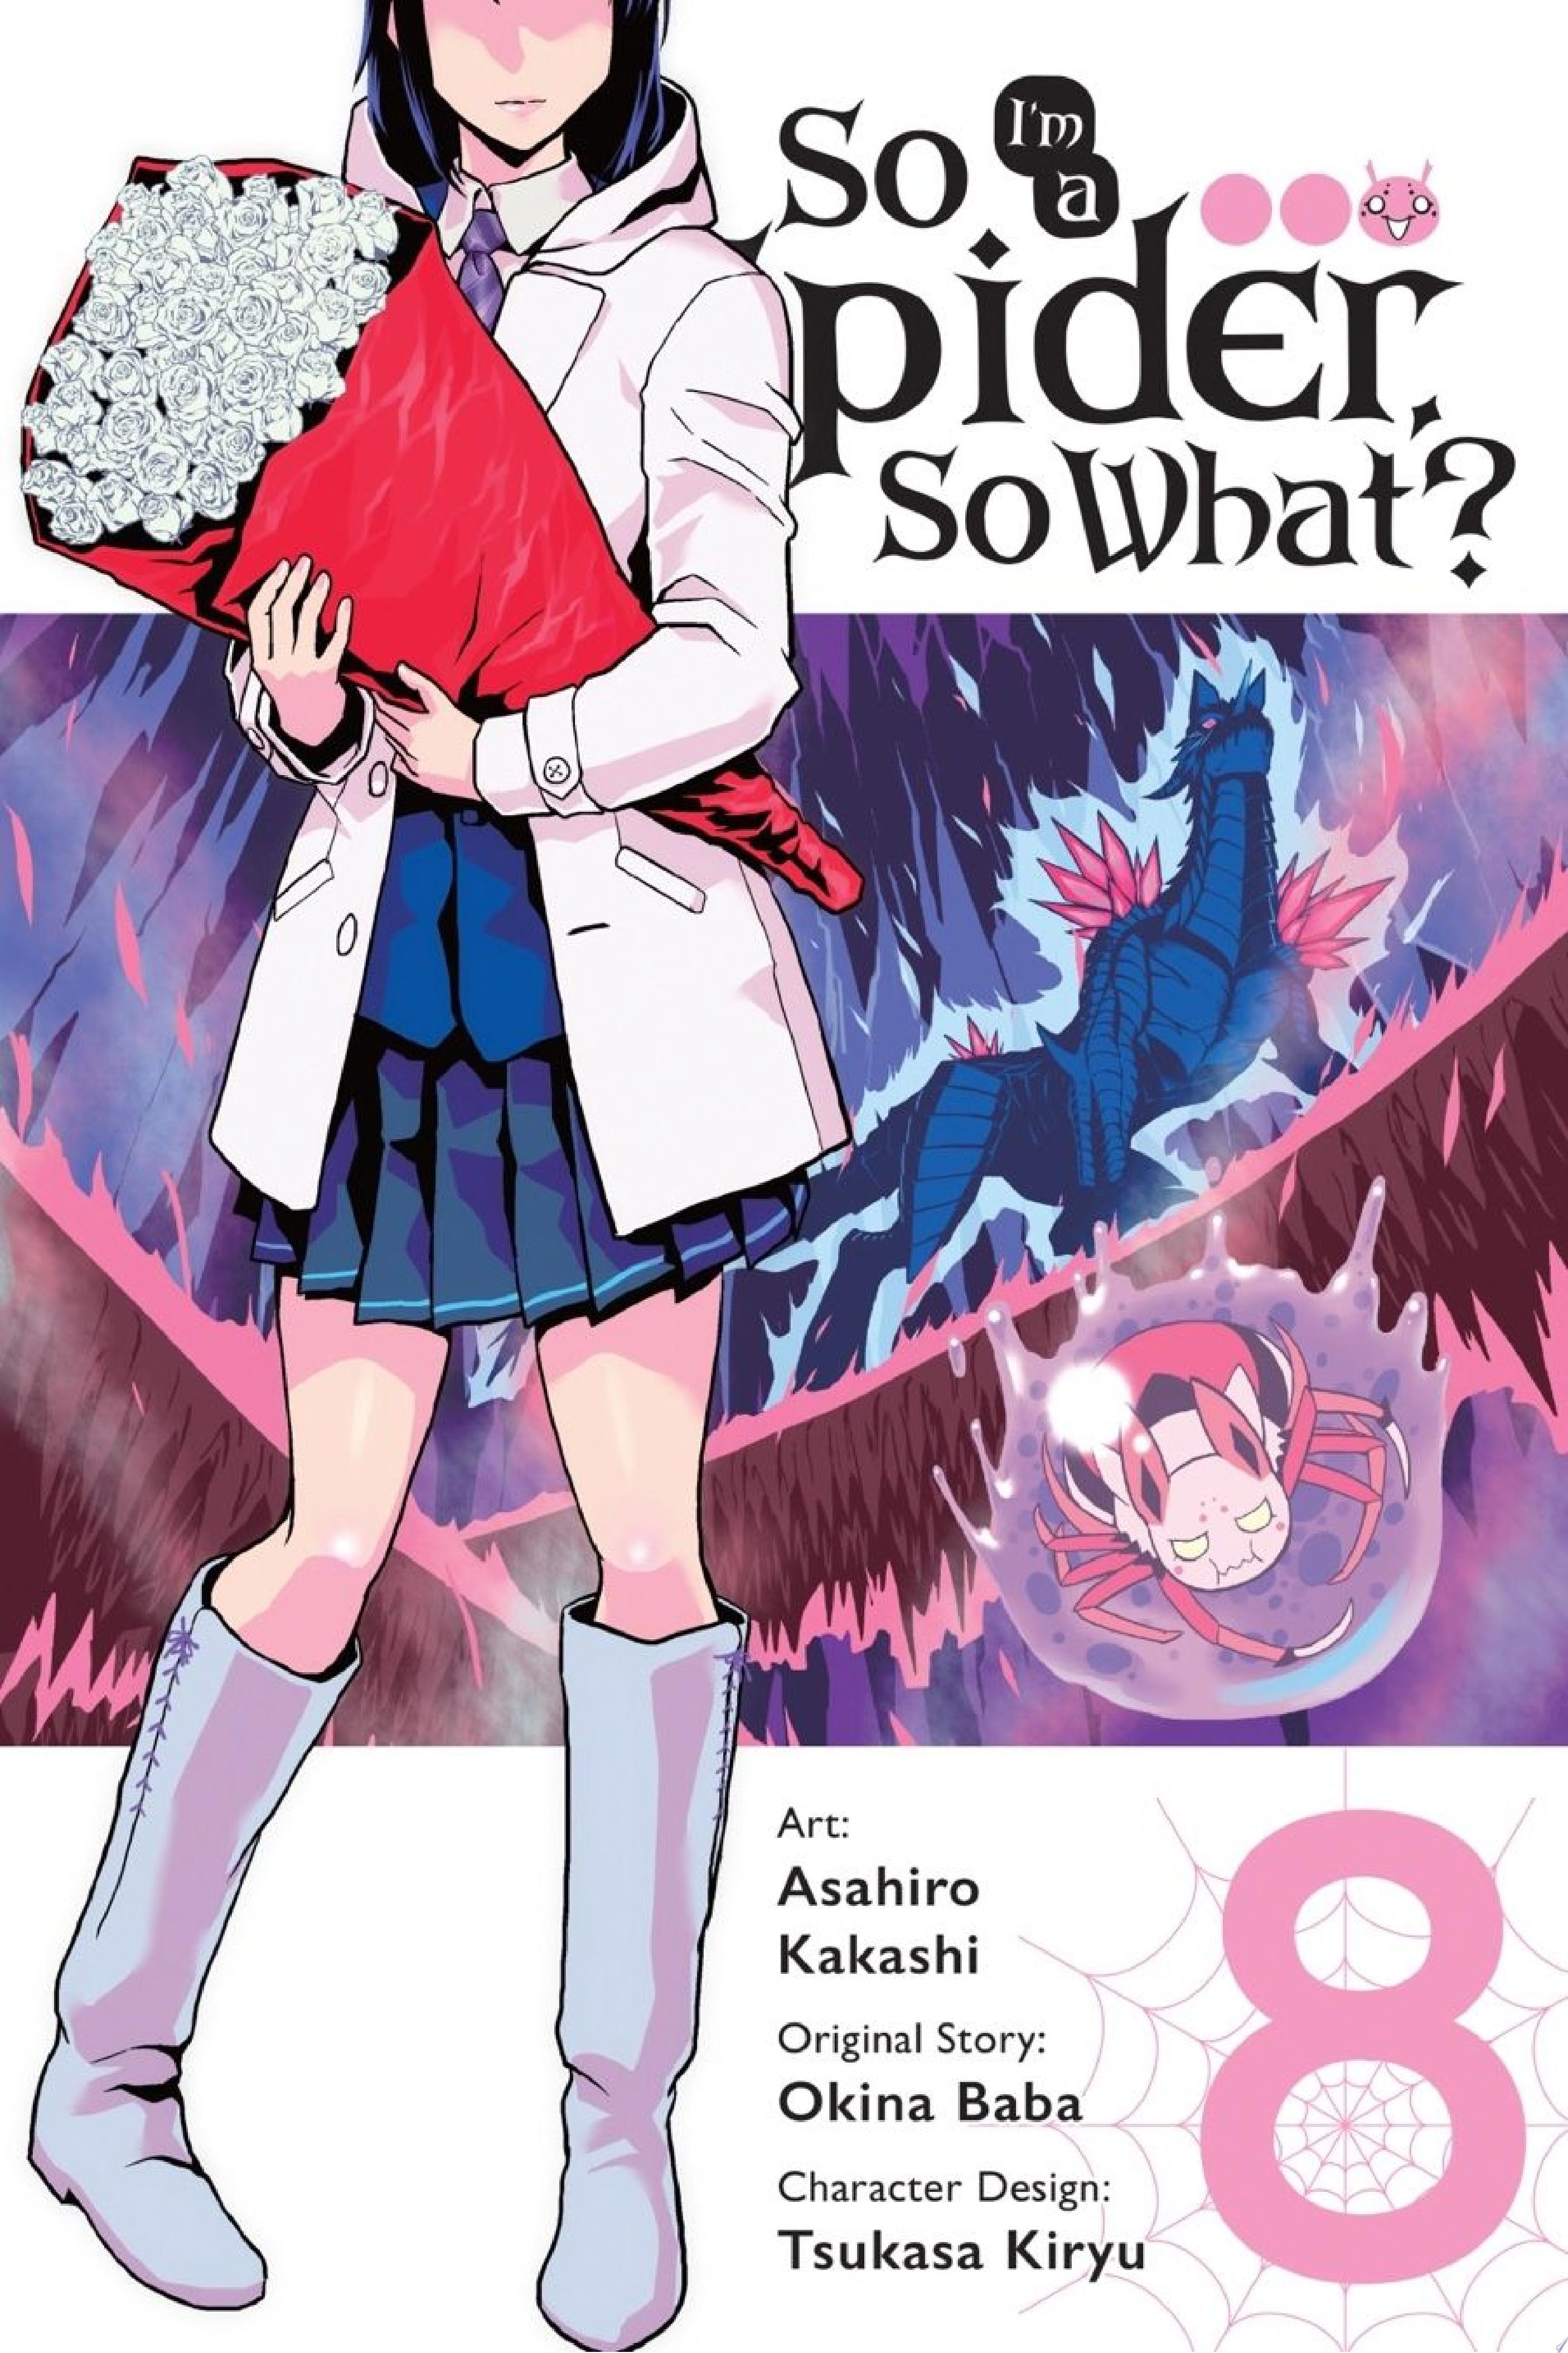 Image for "So I&#039;m a Spider, So What?, Vol. 8 (manga)"